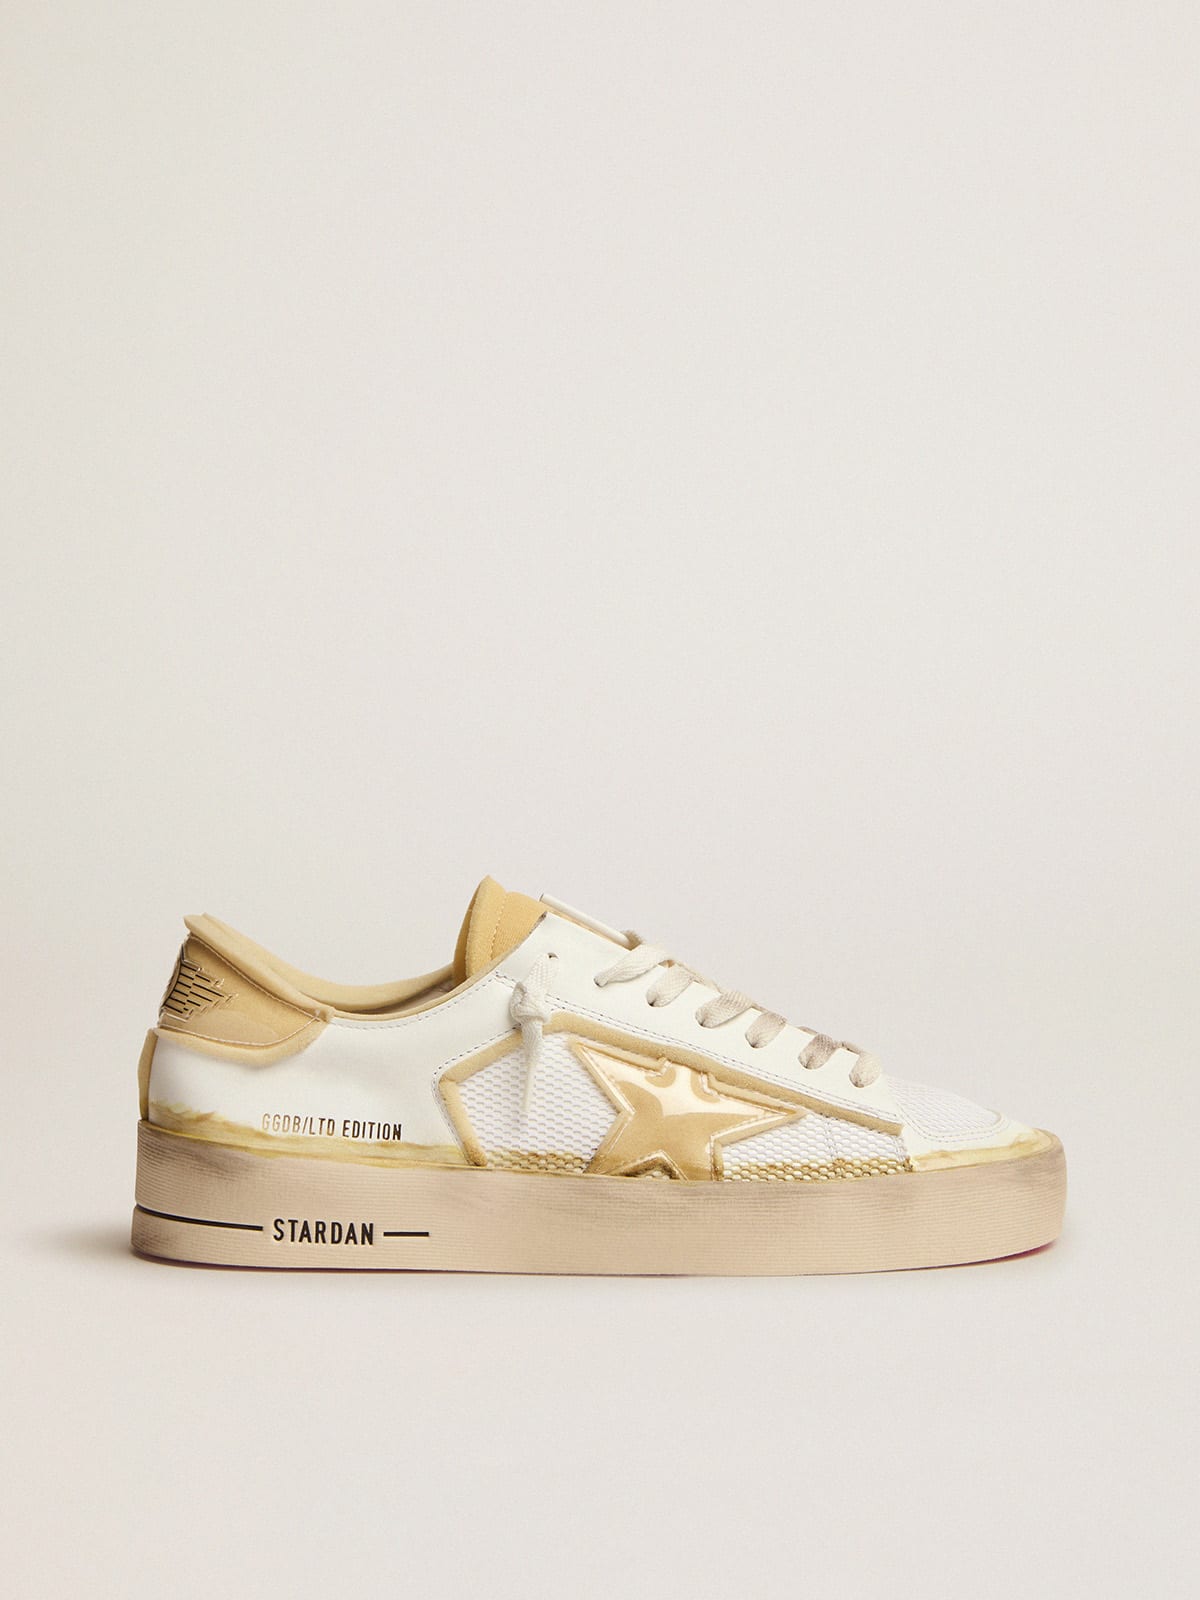 Golden Goose - Men’s Stardan LAB sneakers in white leather with foam and PVC inserts in 